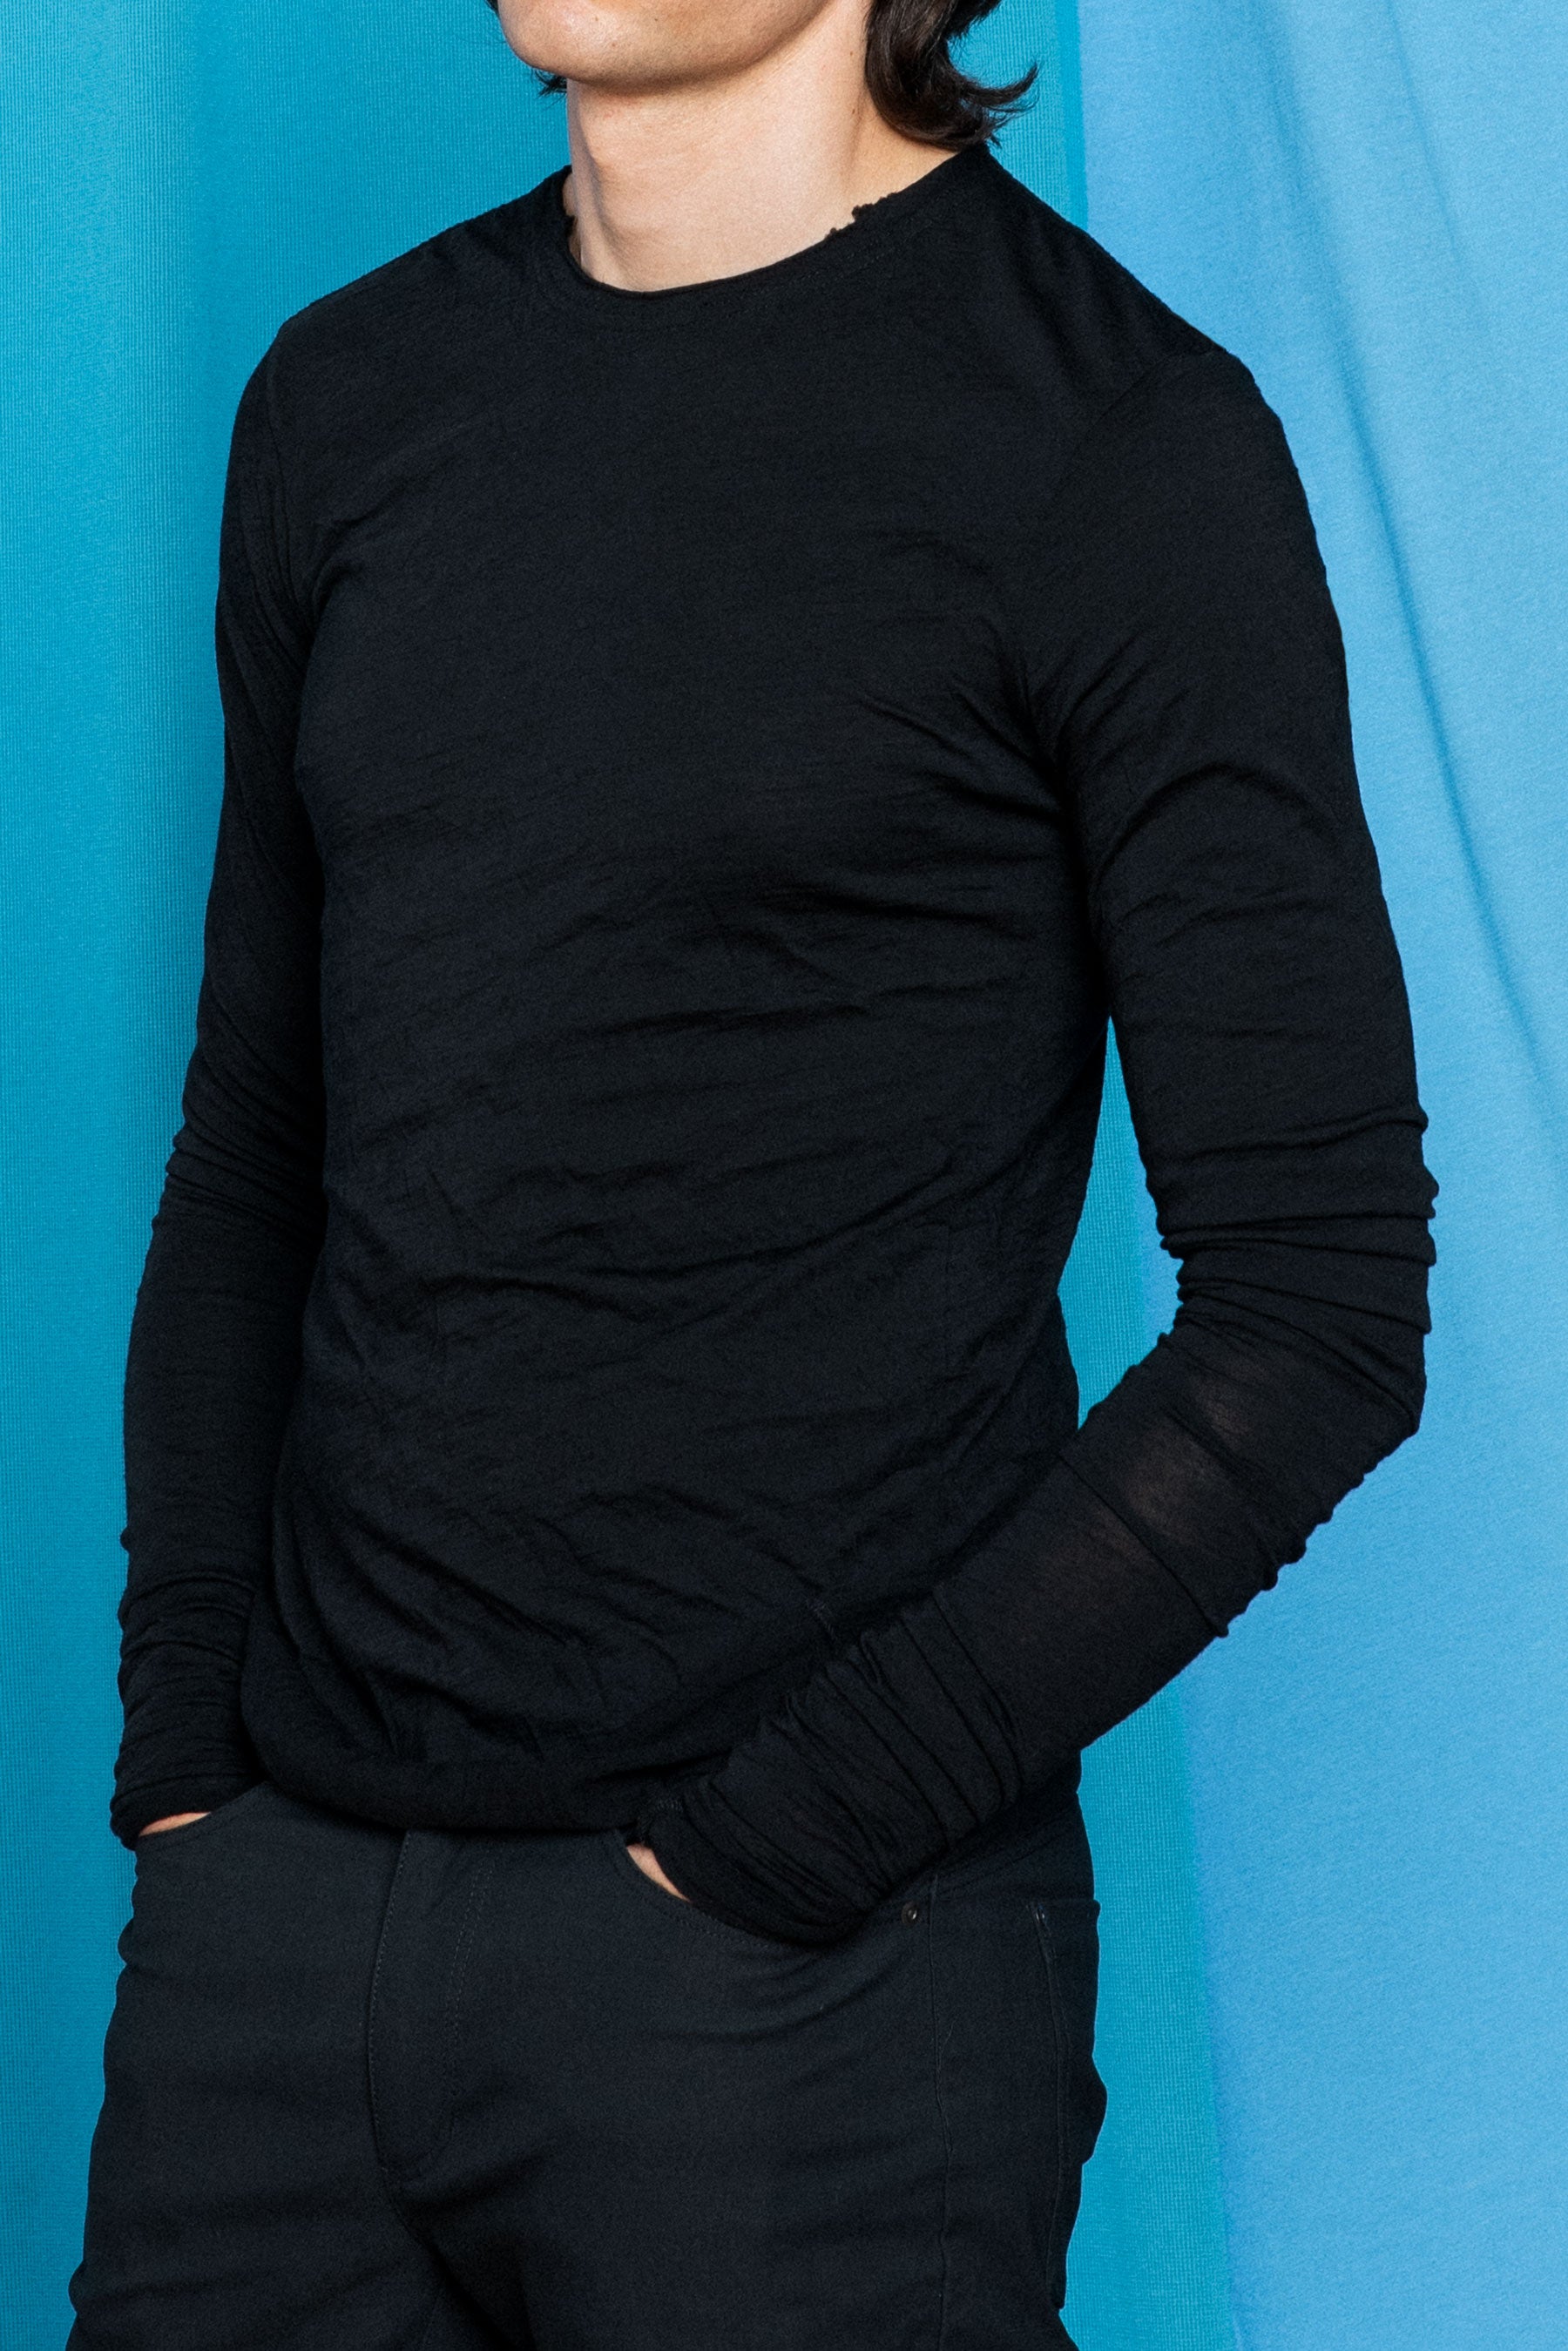 Waist-up image of Daniele wearing the Dreamweight Rawcut Longsleeve in Black with his hands in his pockets.